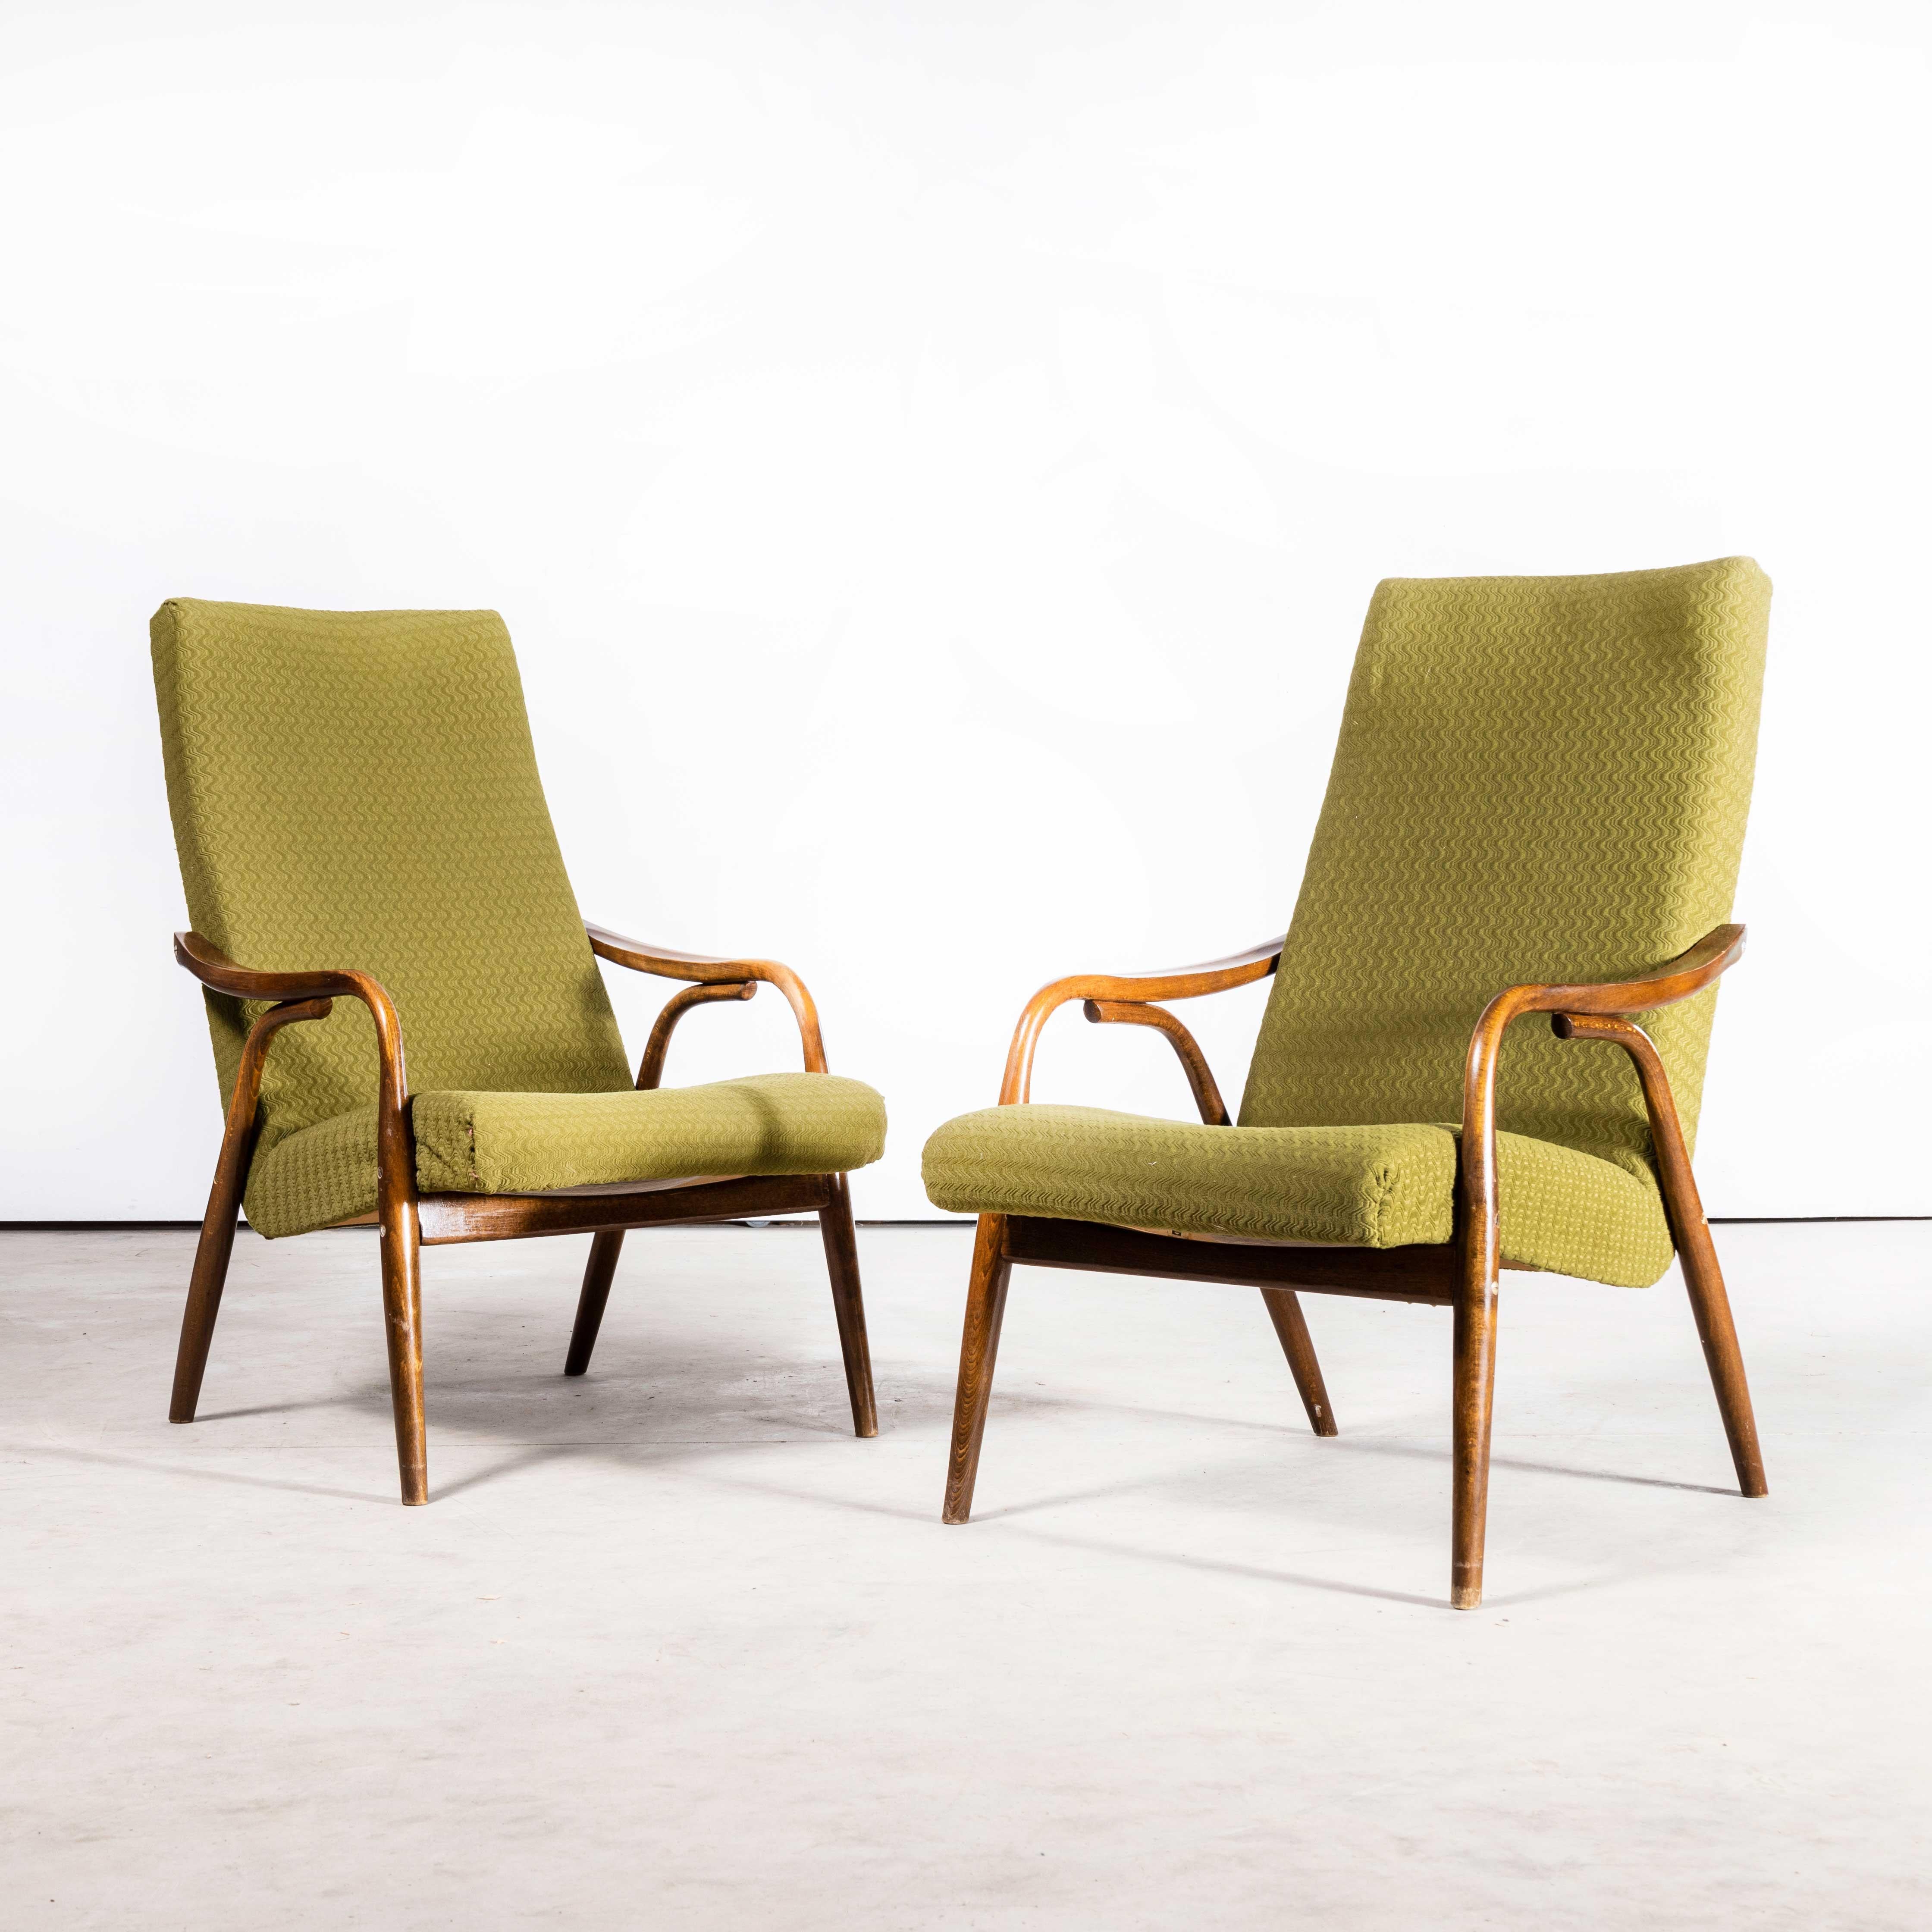 Mid-20th Century 1950s Czech Midcentury Original Armchairs, Pair in Olive Green